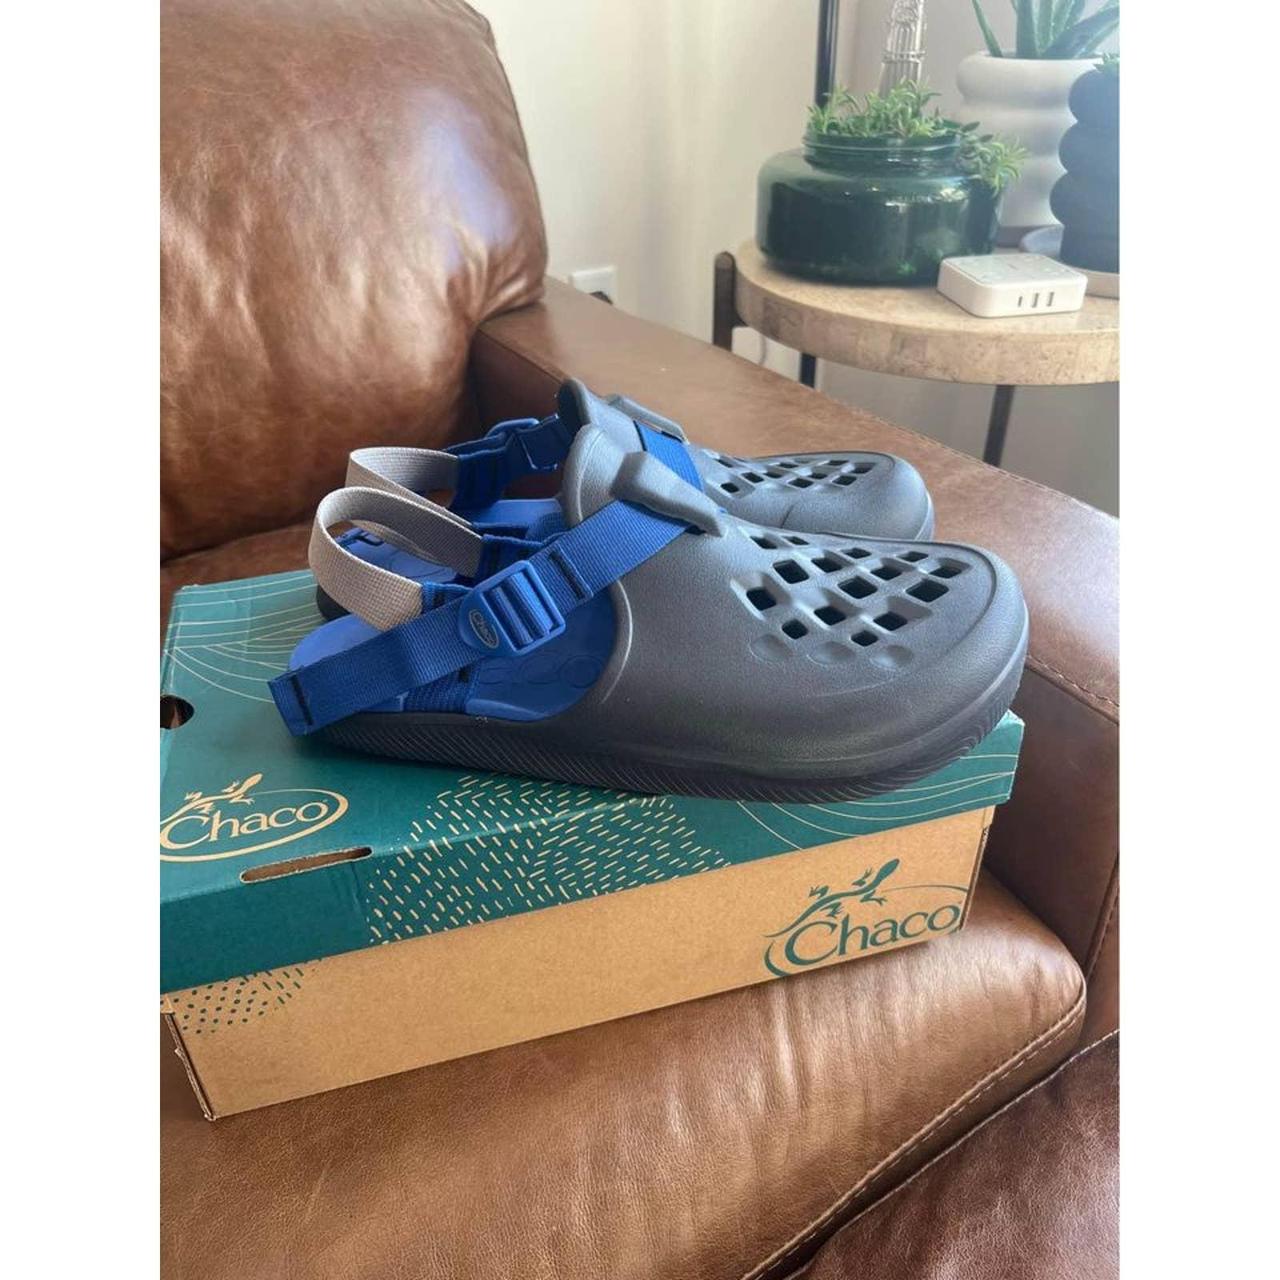 Chacos Mens Chillos Clog. Size 12 and fits true to... - Depop